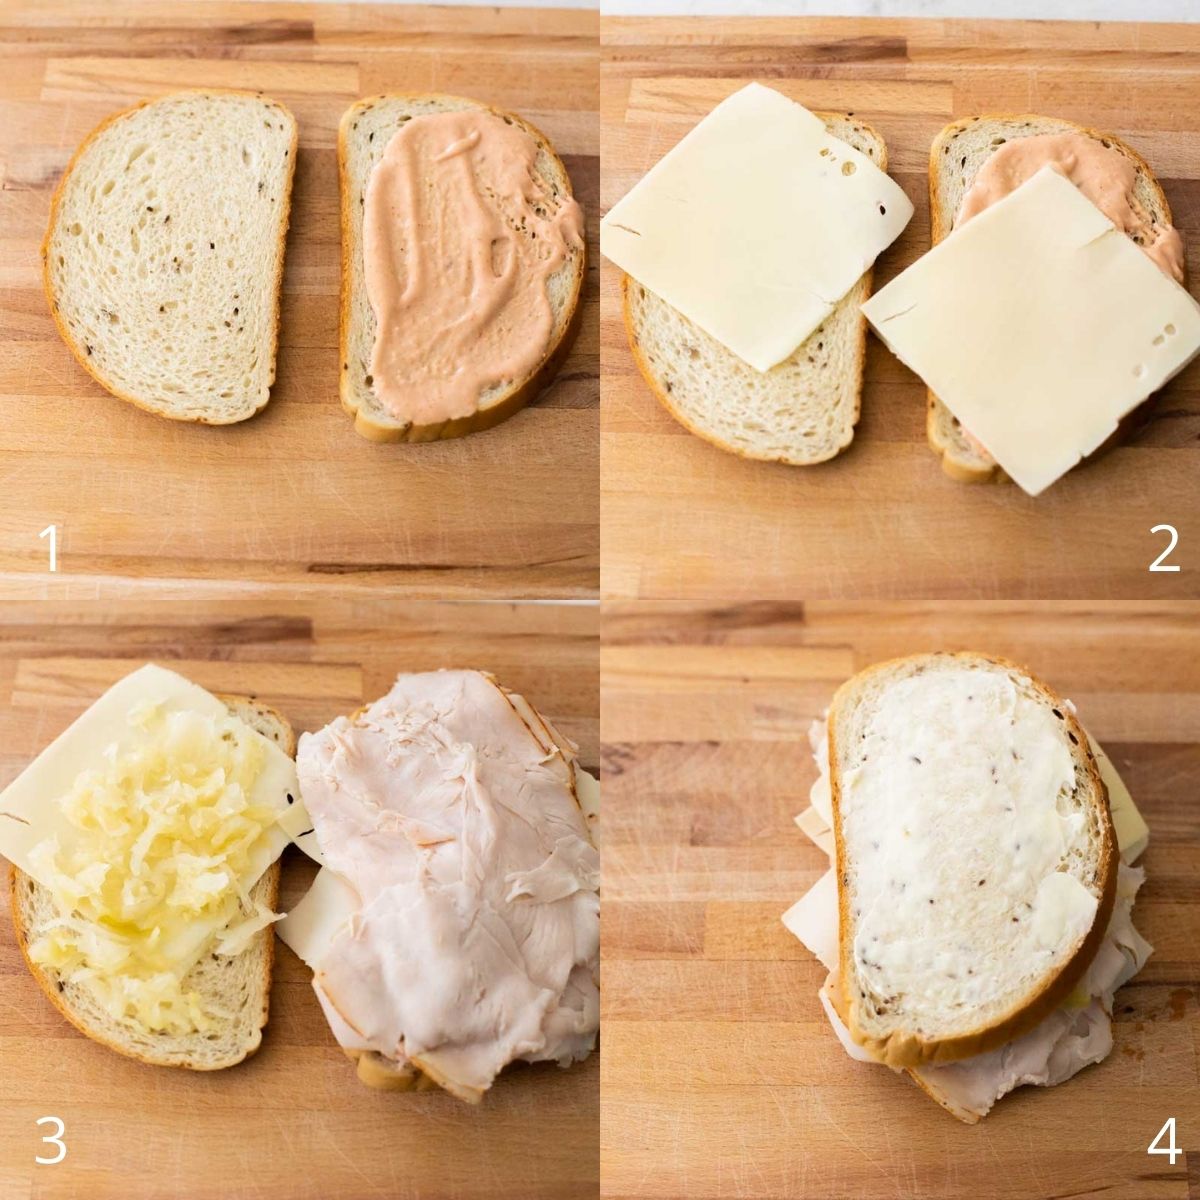 Step by step photos show how to layer the sauce, cheese, sauerkraut, and turkey on rye bread. 